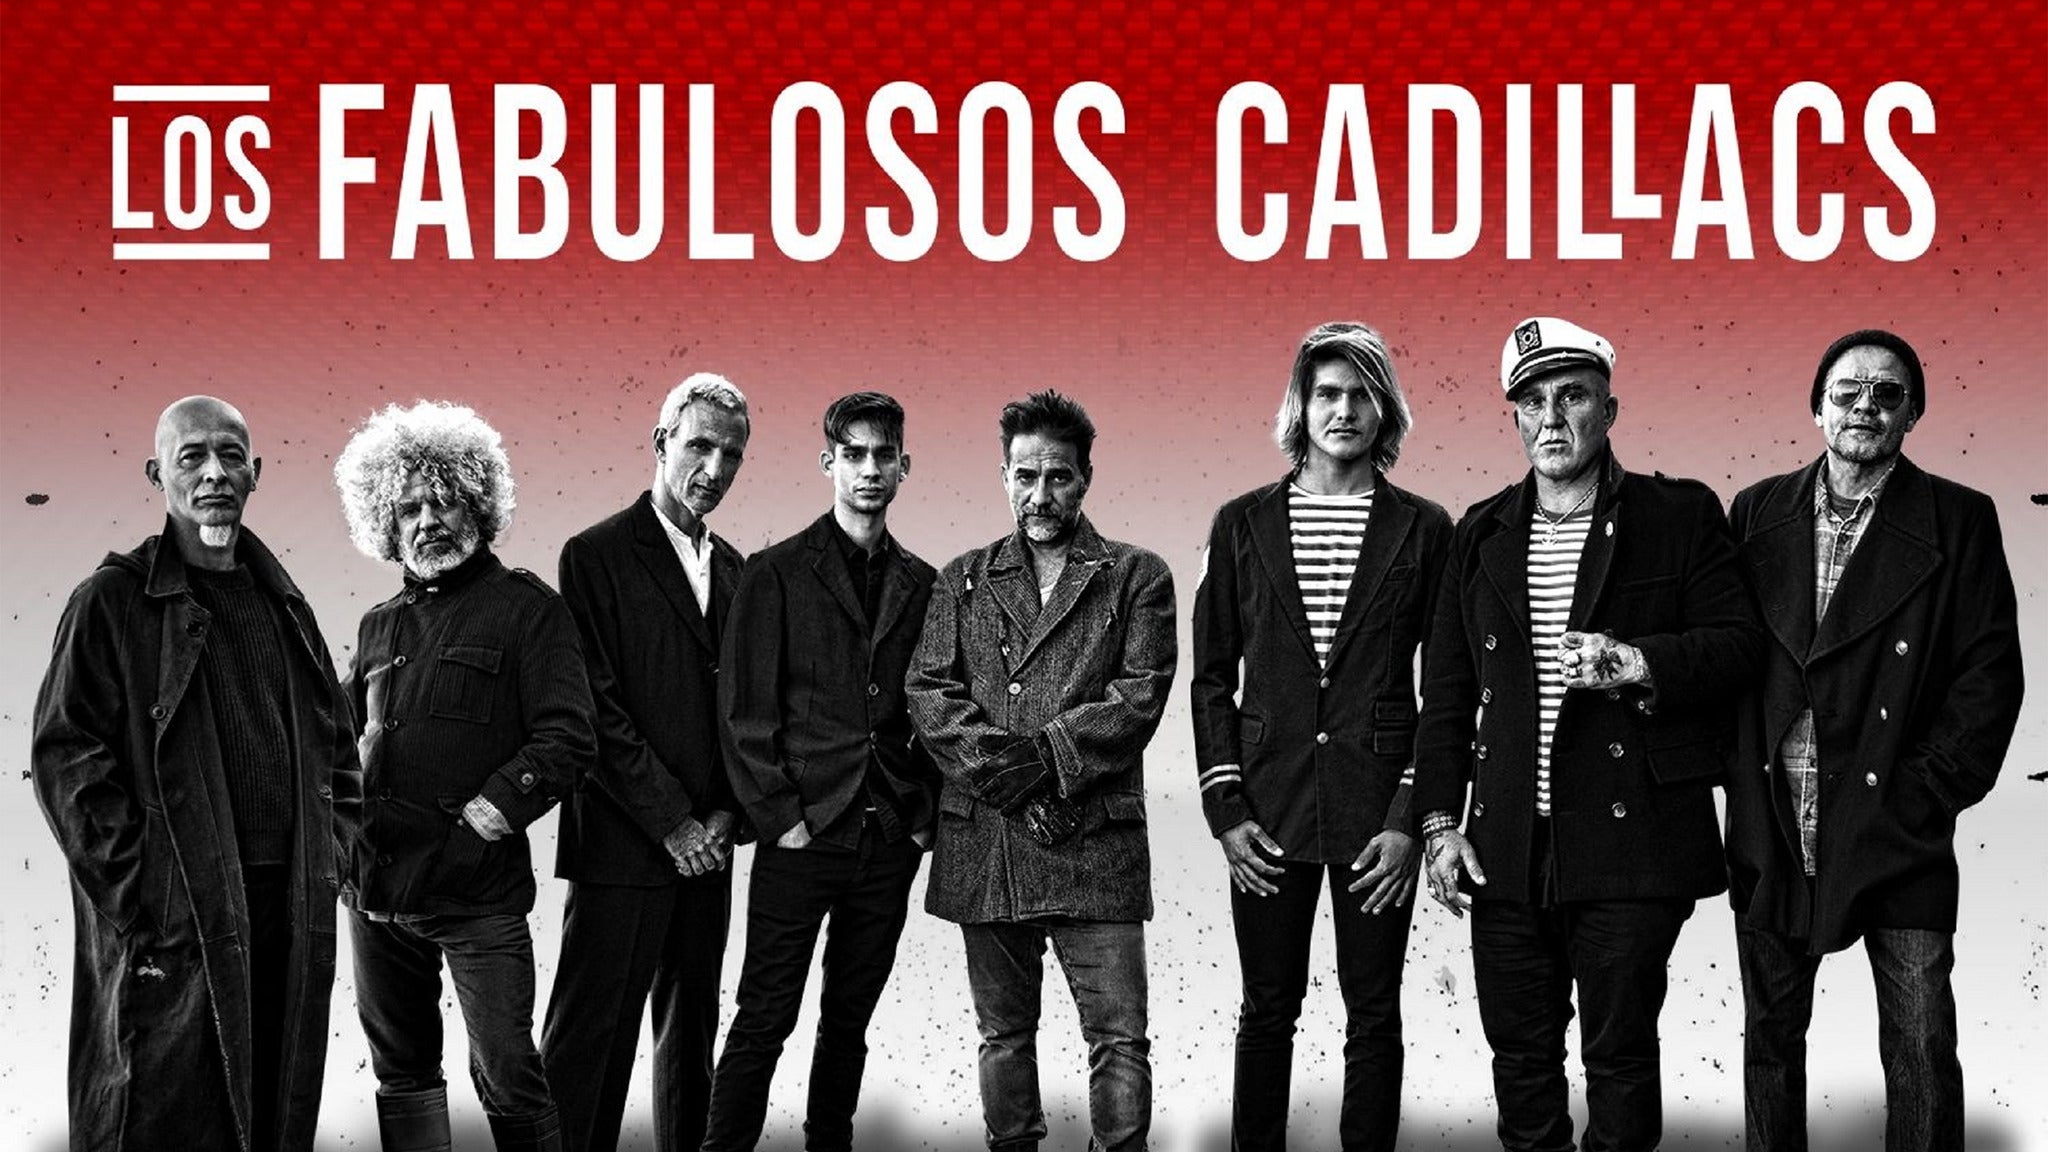 Los Fabulosos Cadillacs in New York promo photo for Official Platinum presale offer code